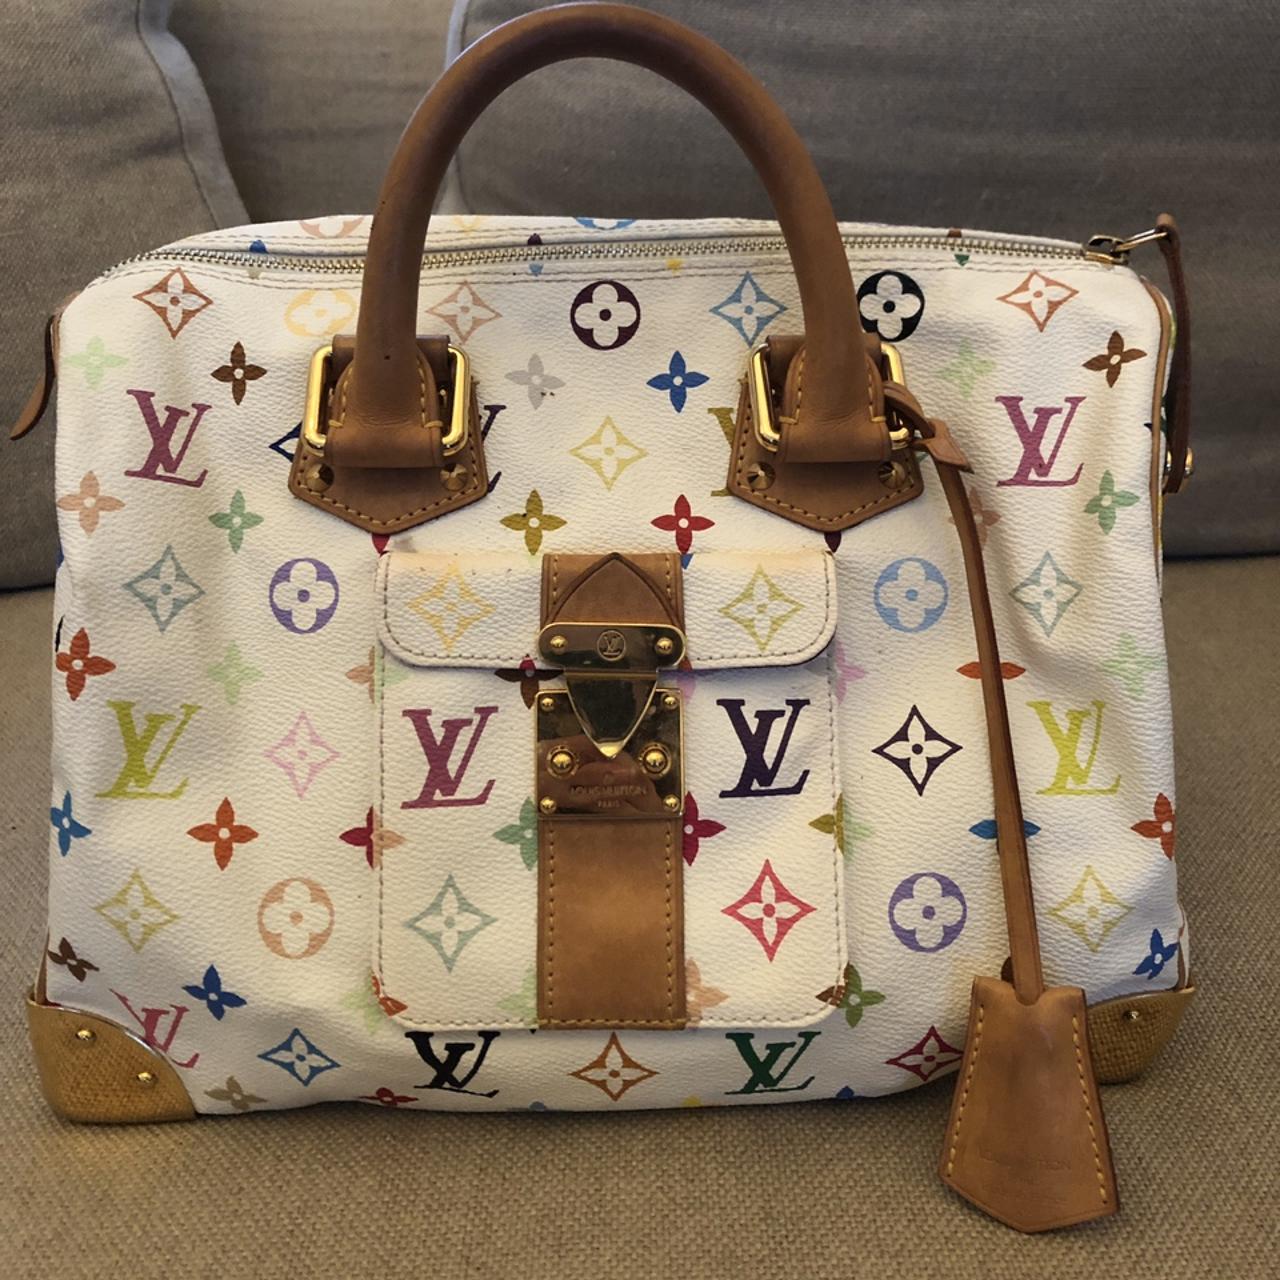 The Best Limited Edition Louis Vuitton Handbags, Handbags and Accessories